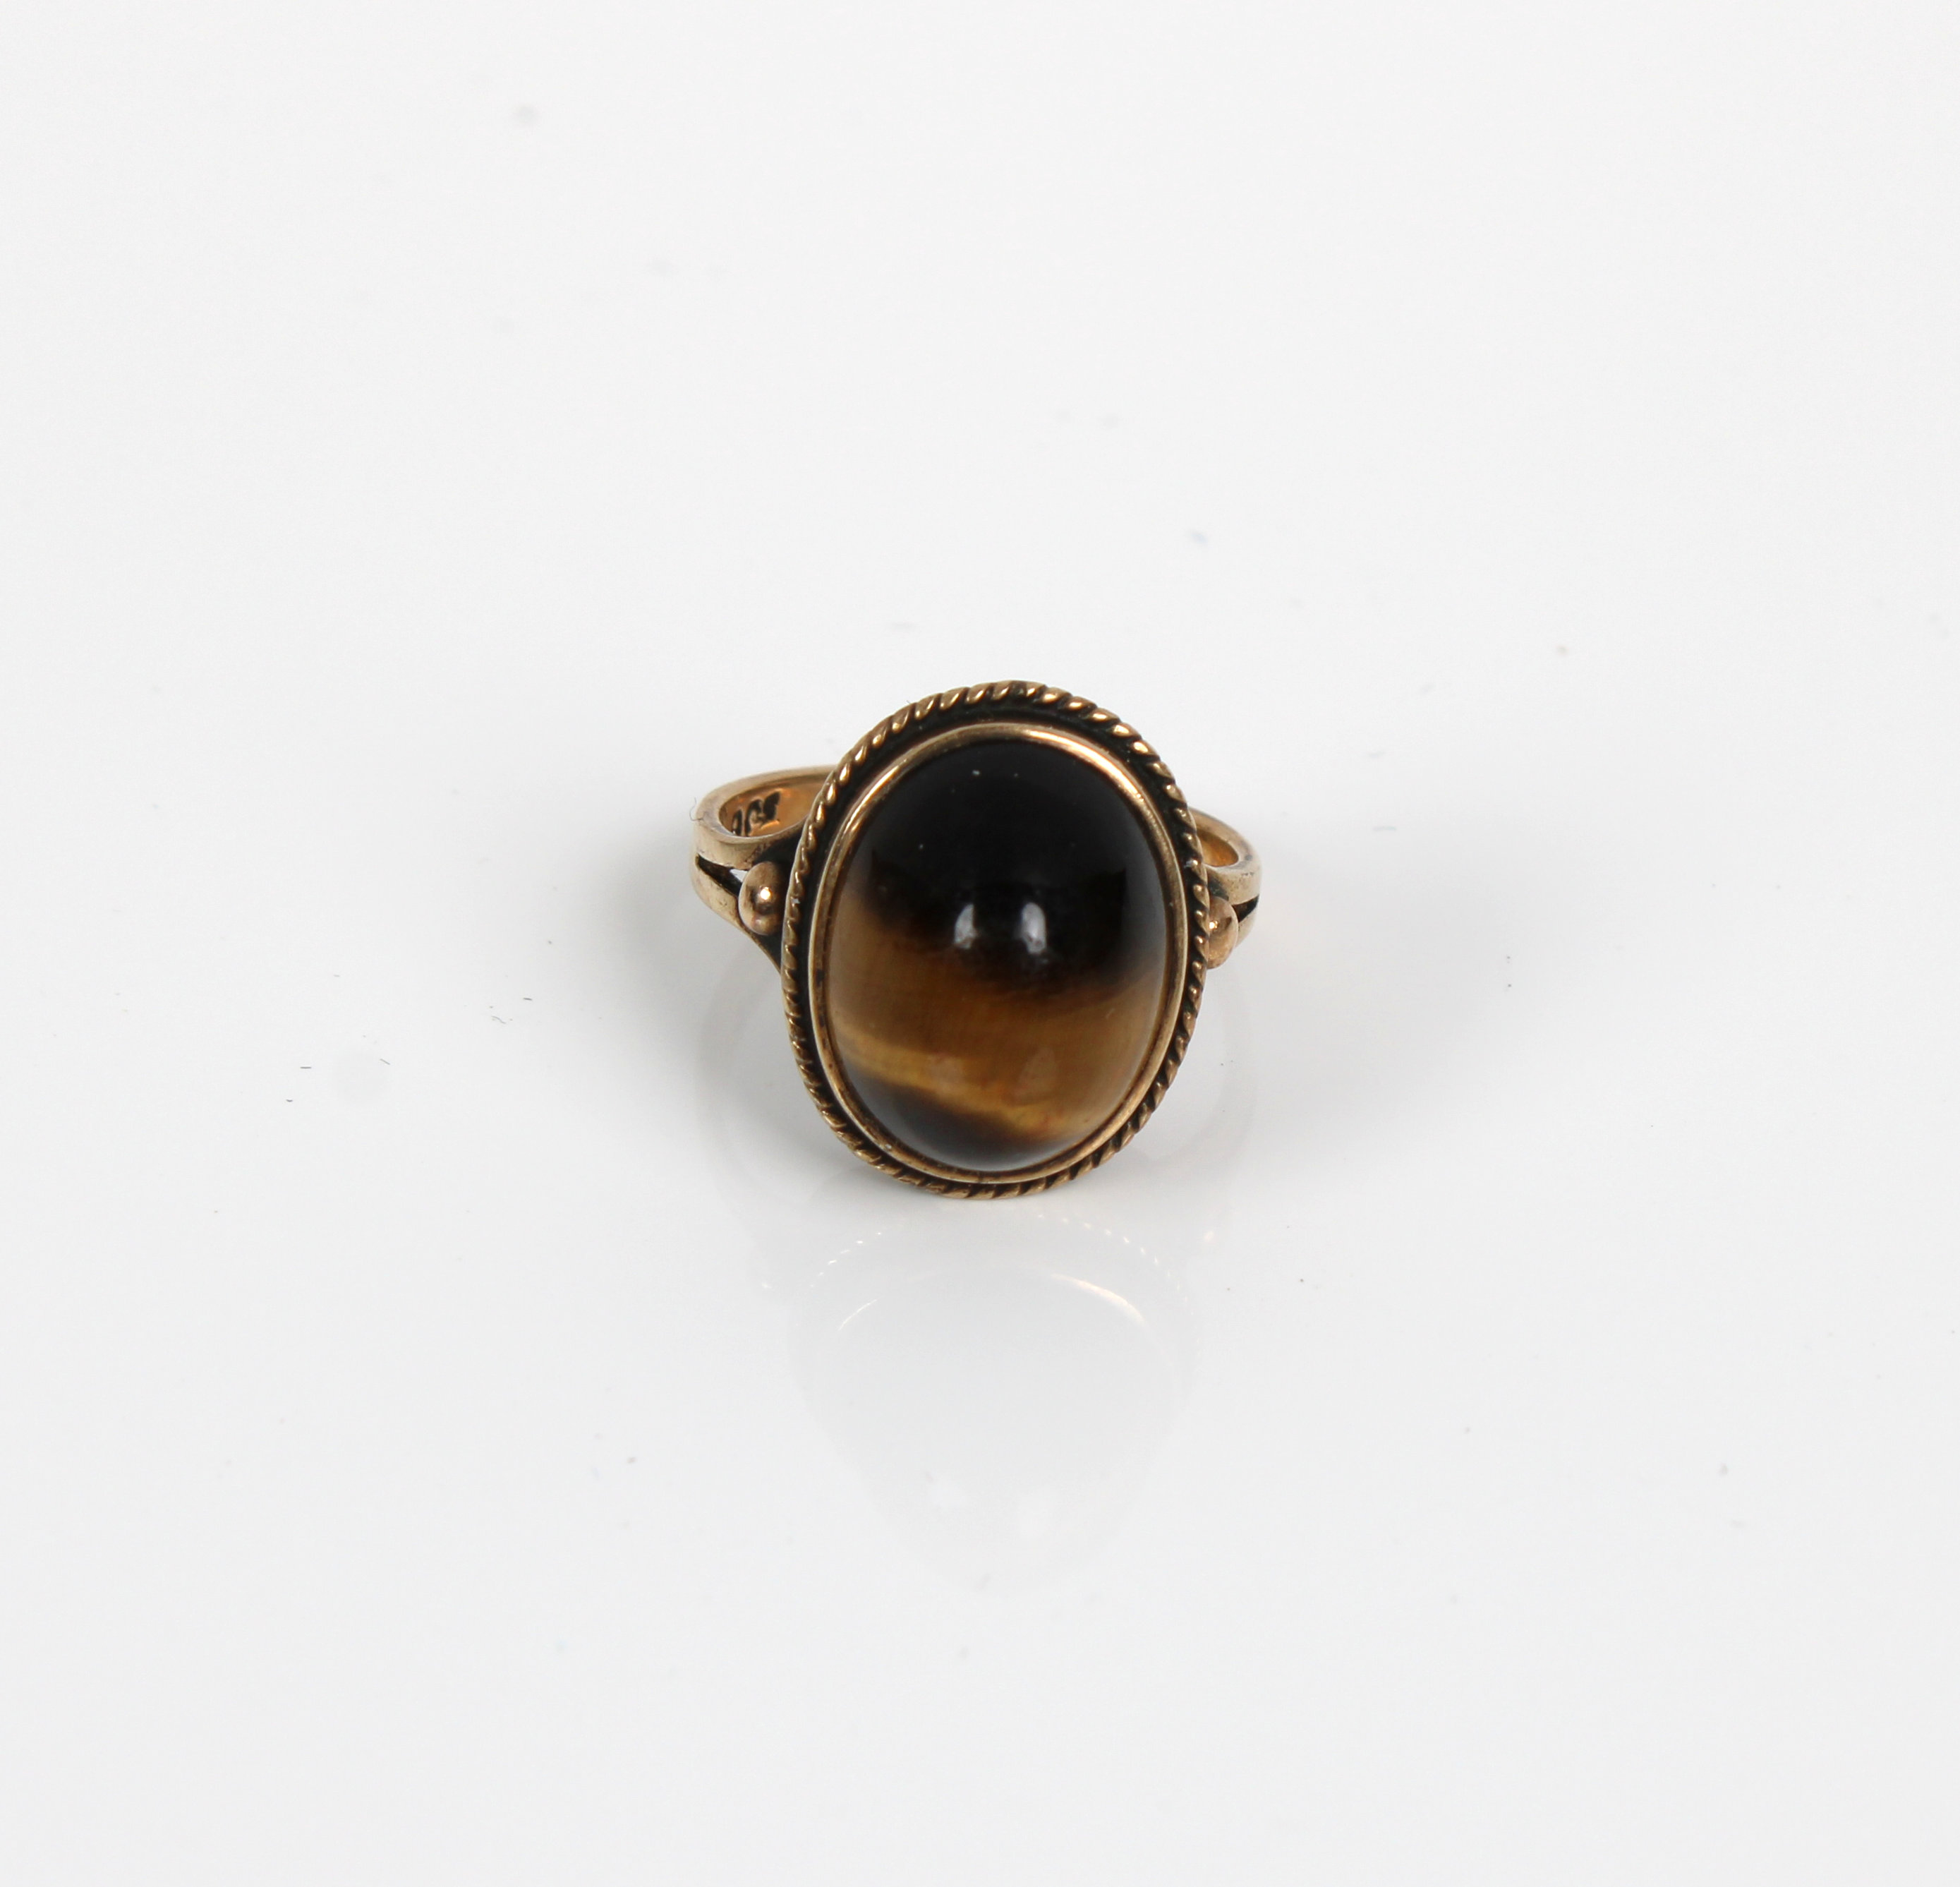 A 9ct gold ring inset with a polished Tigers Eye cabochon